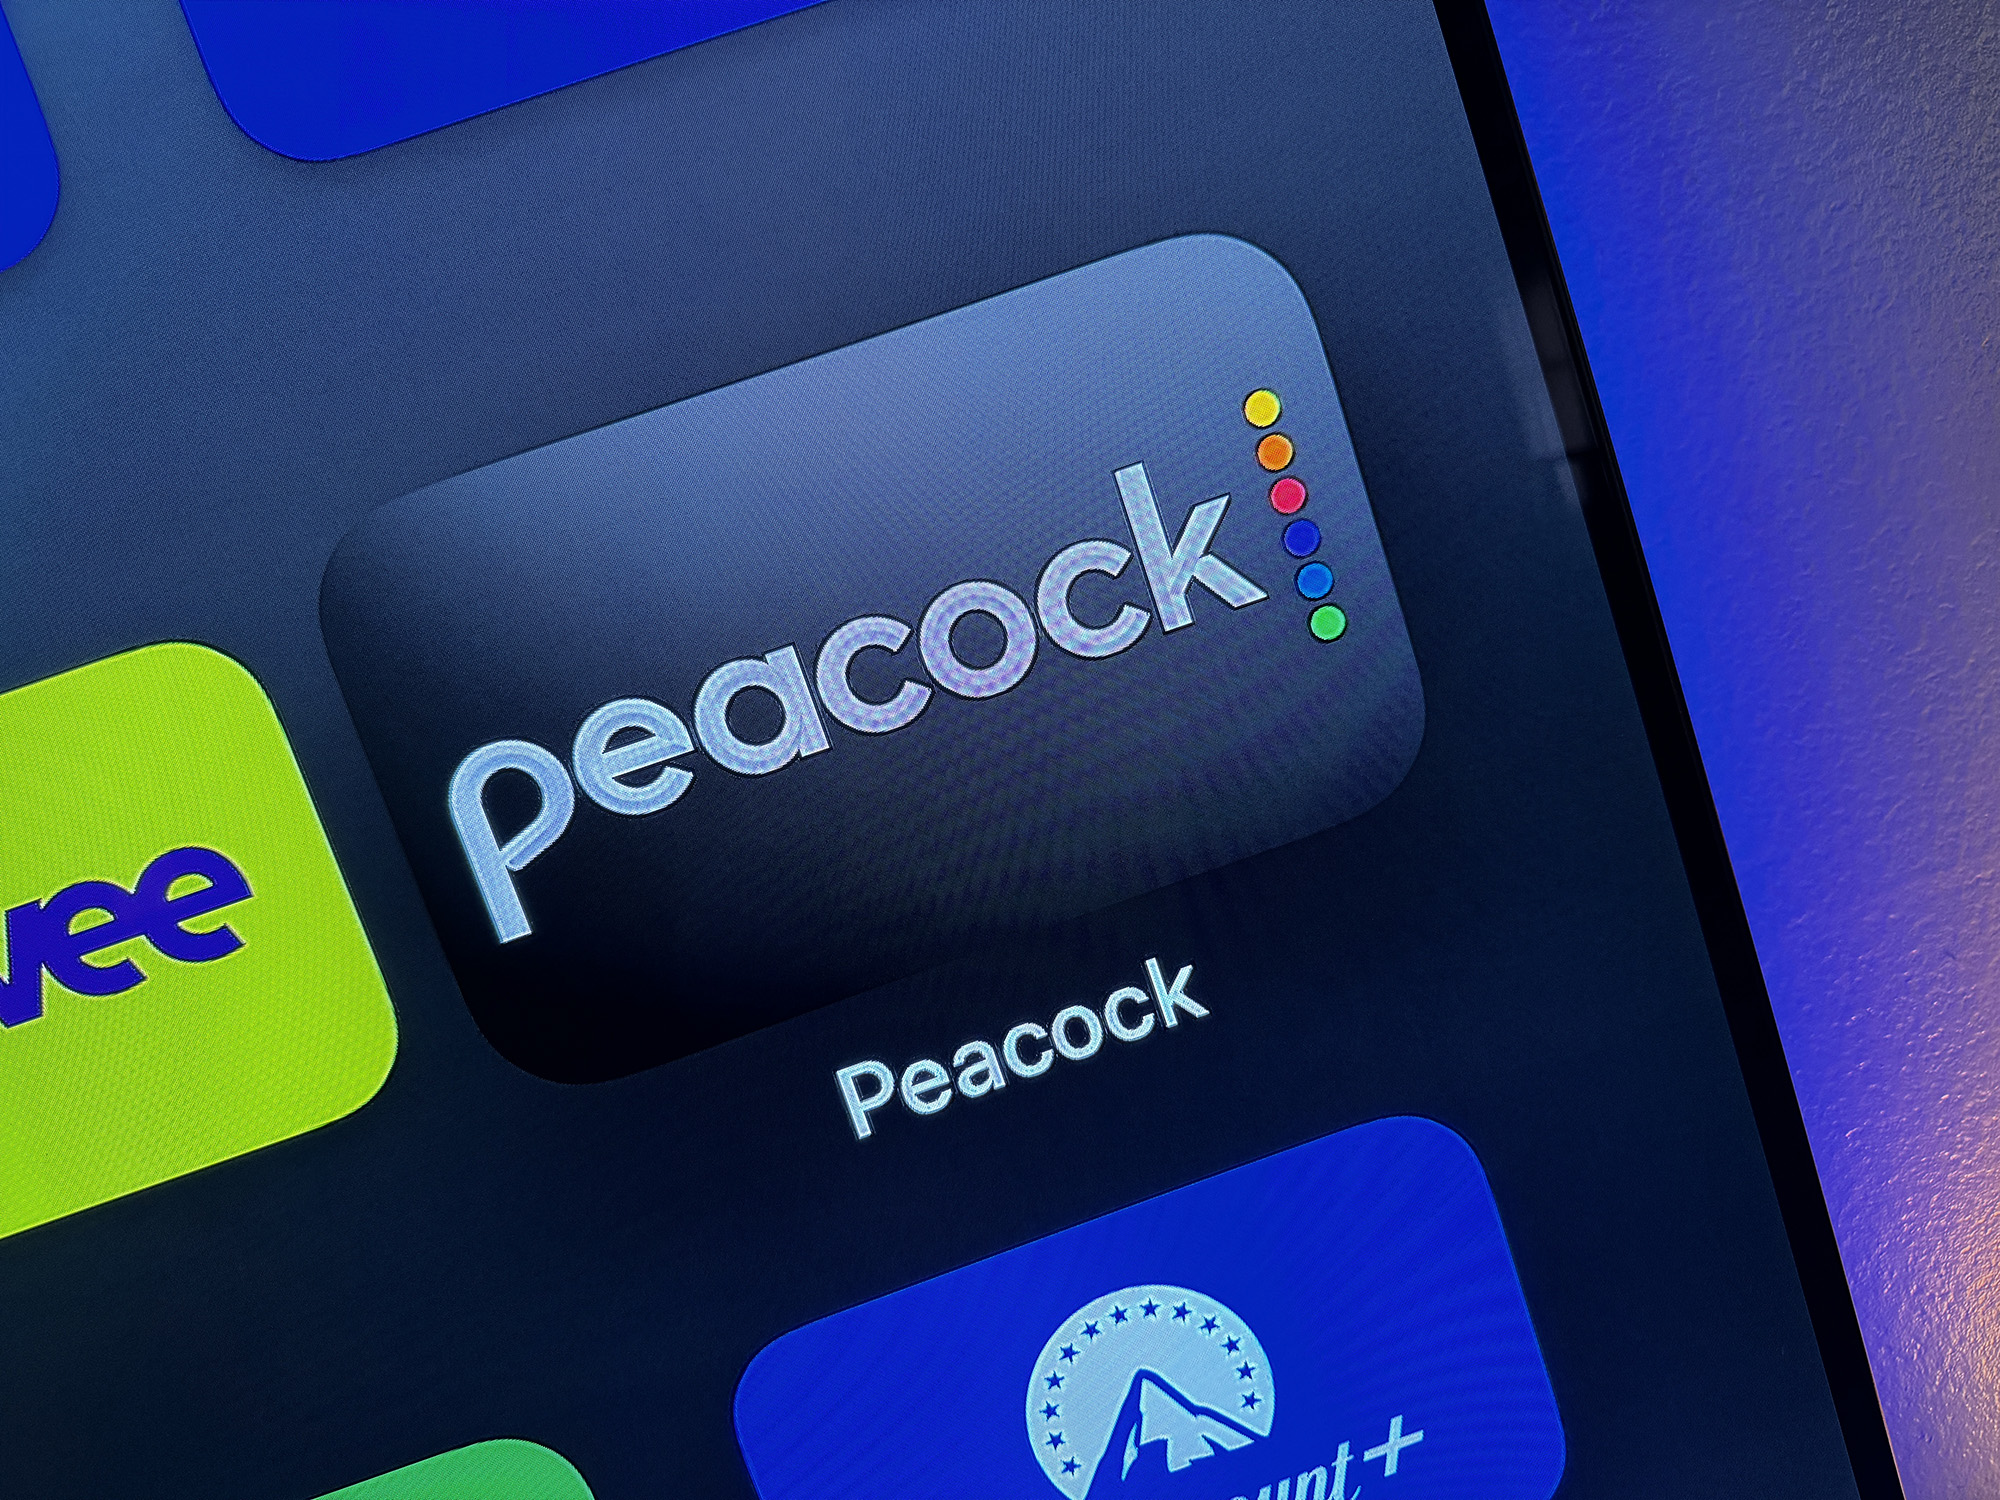 The Peacock app icon on Apple TV.